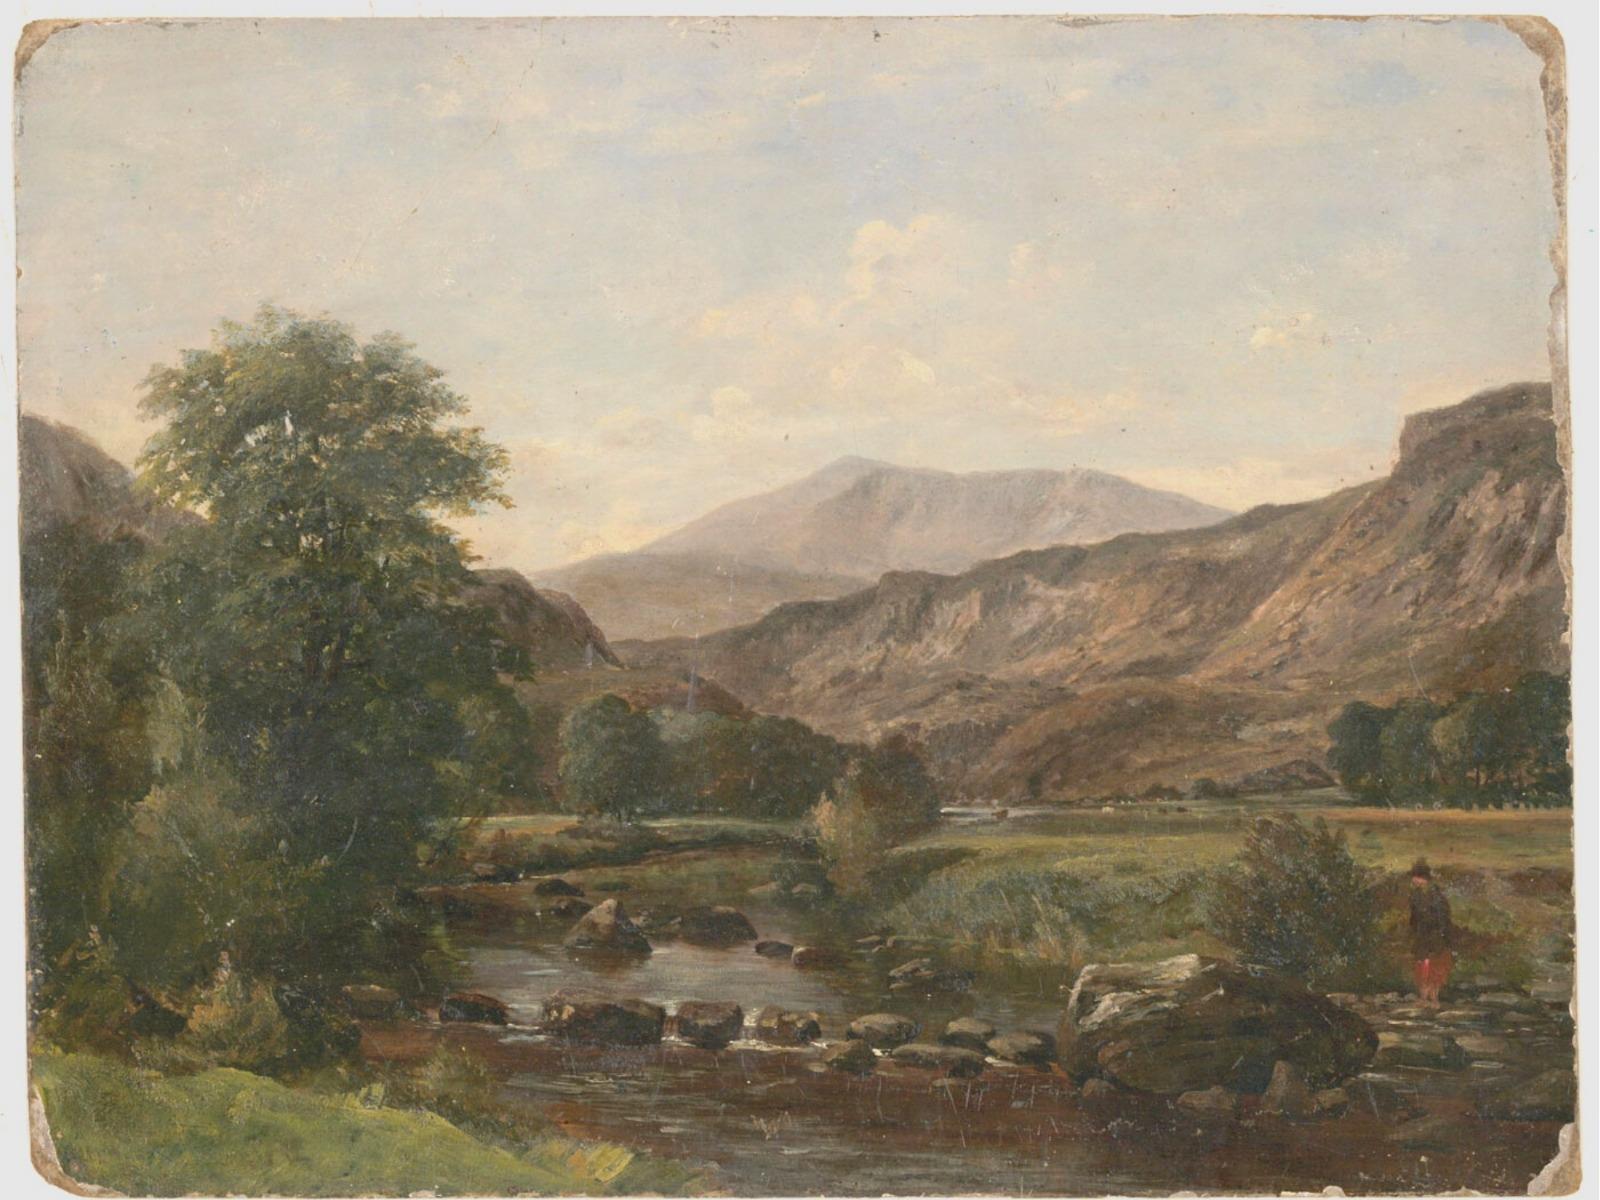 A very fine panoramic landscape, possibly depicting North Wales by the English artist George Turner. Here the artist has captured a quiet valley with a lone figure at the river's edge. Distant mountains dominate the skyline and the idyllic river can